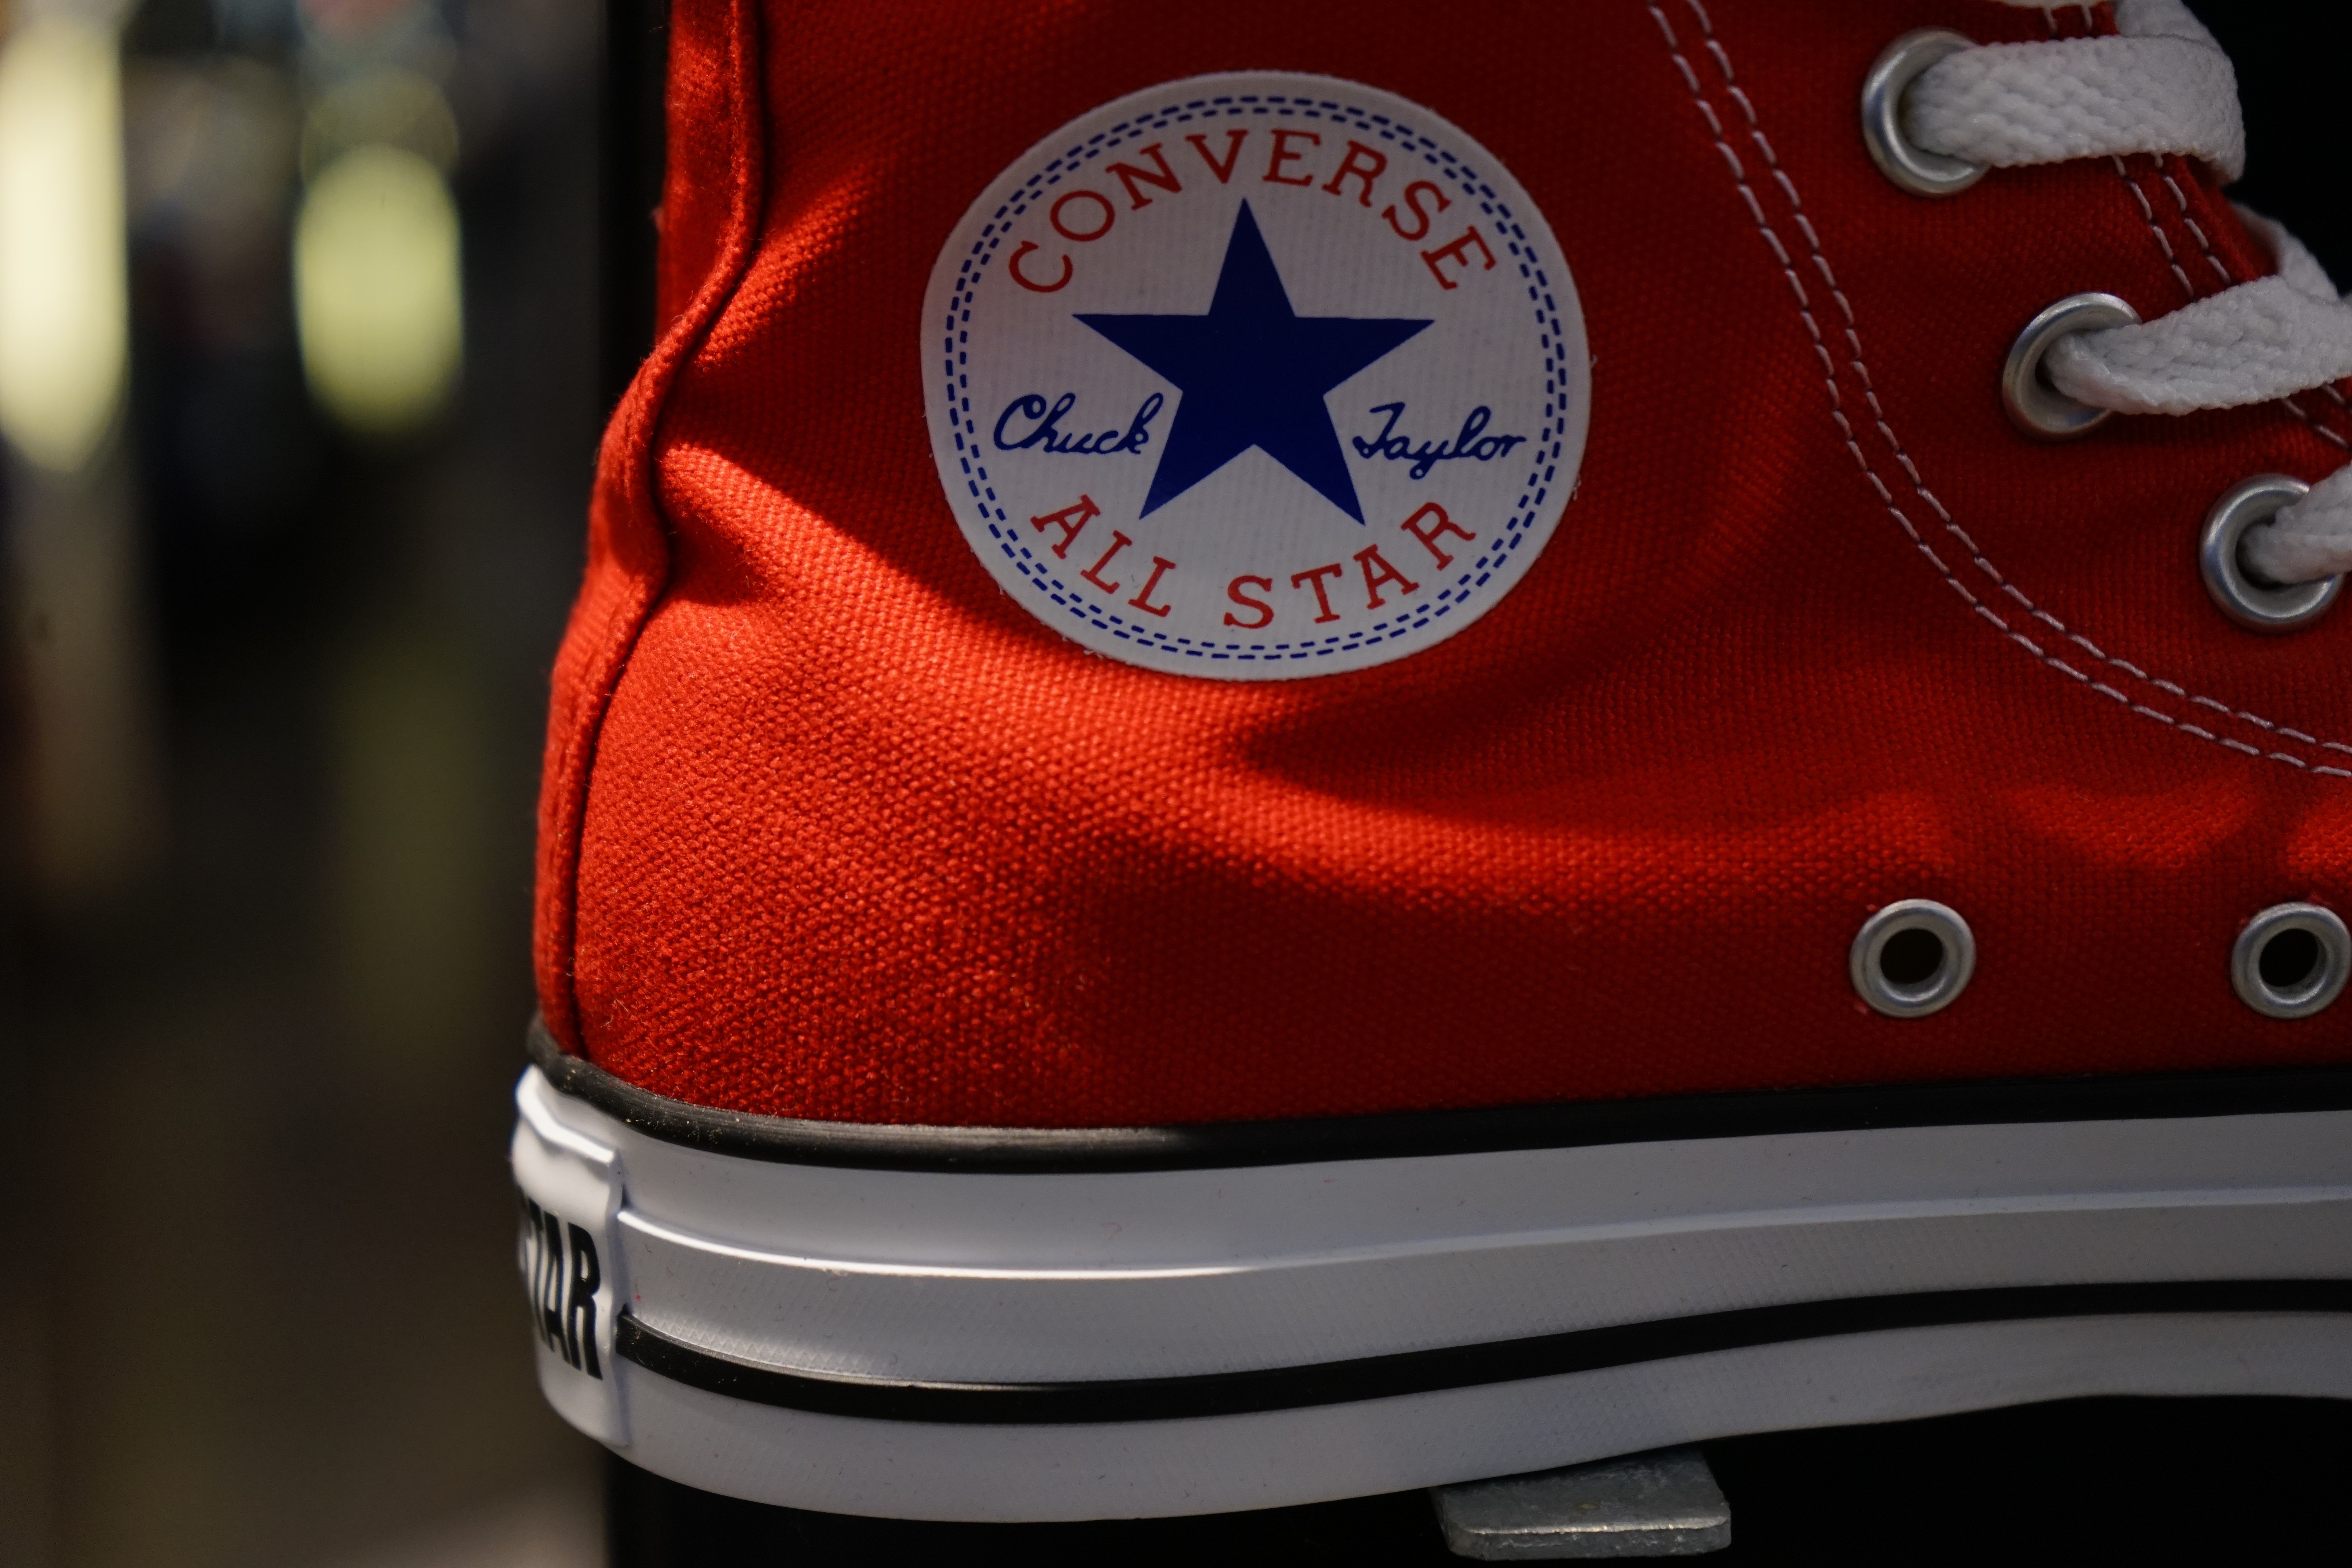 red converse all star high top sneakers